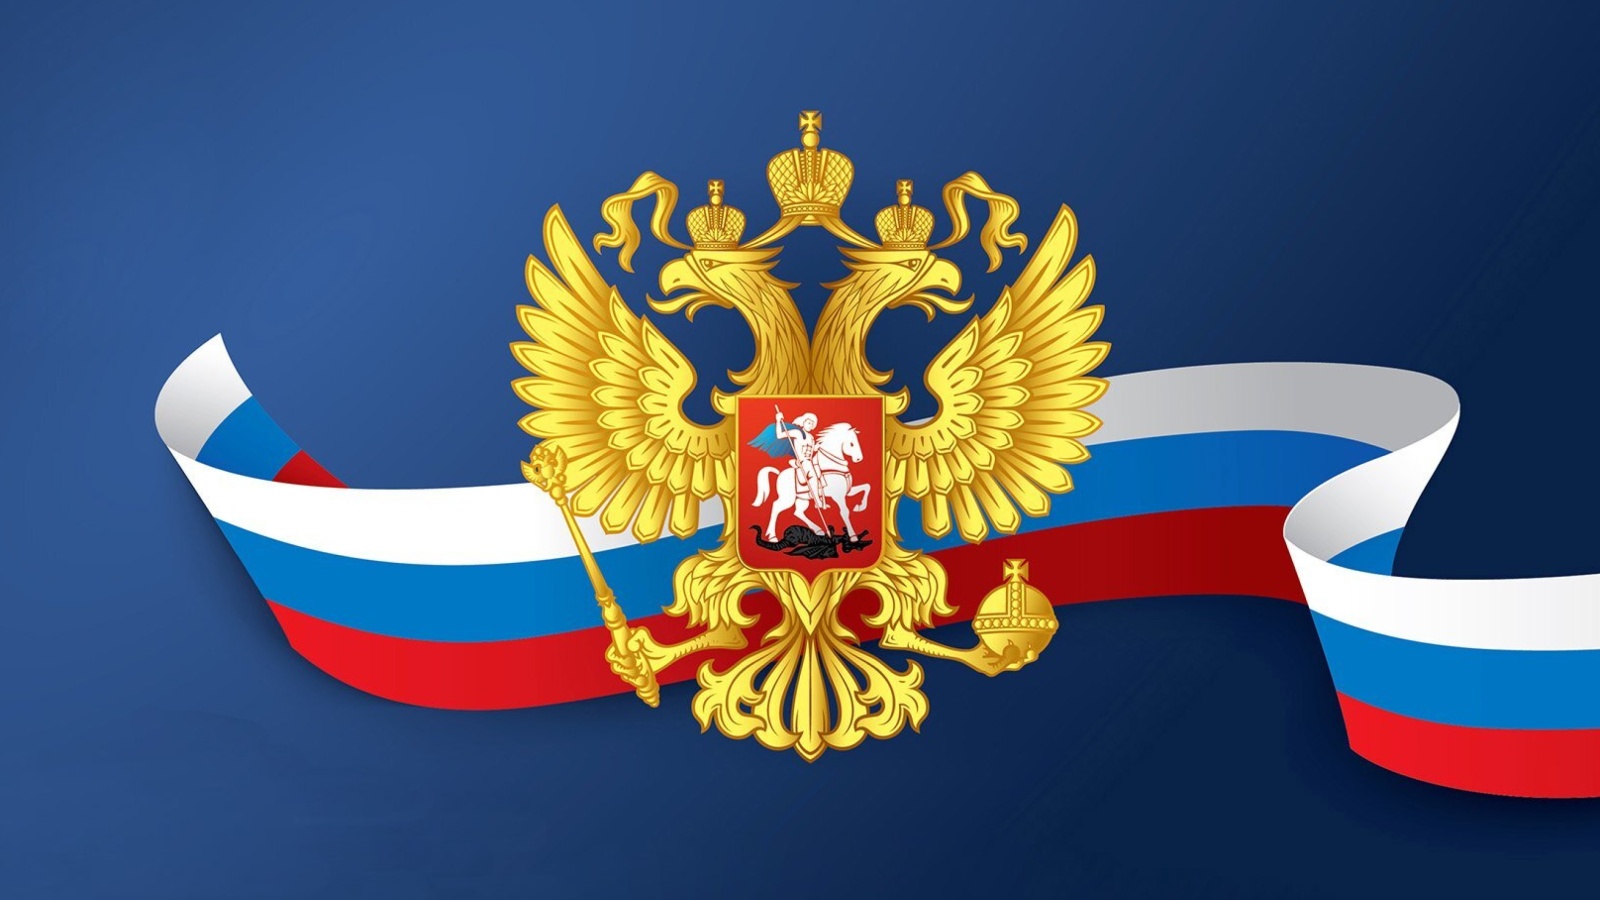 Russian coat of arms and flag screenshot #1 1600x900